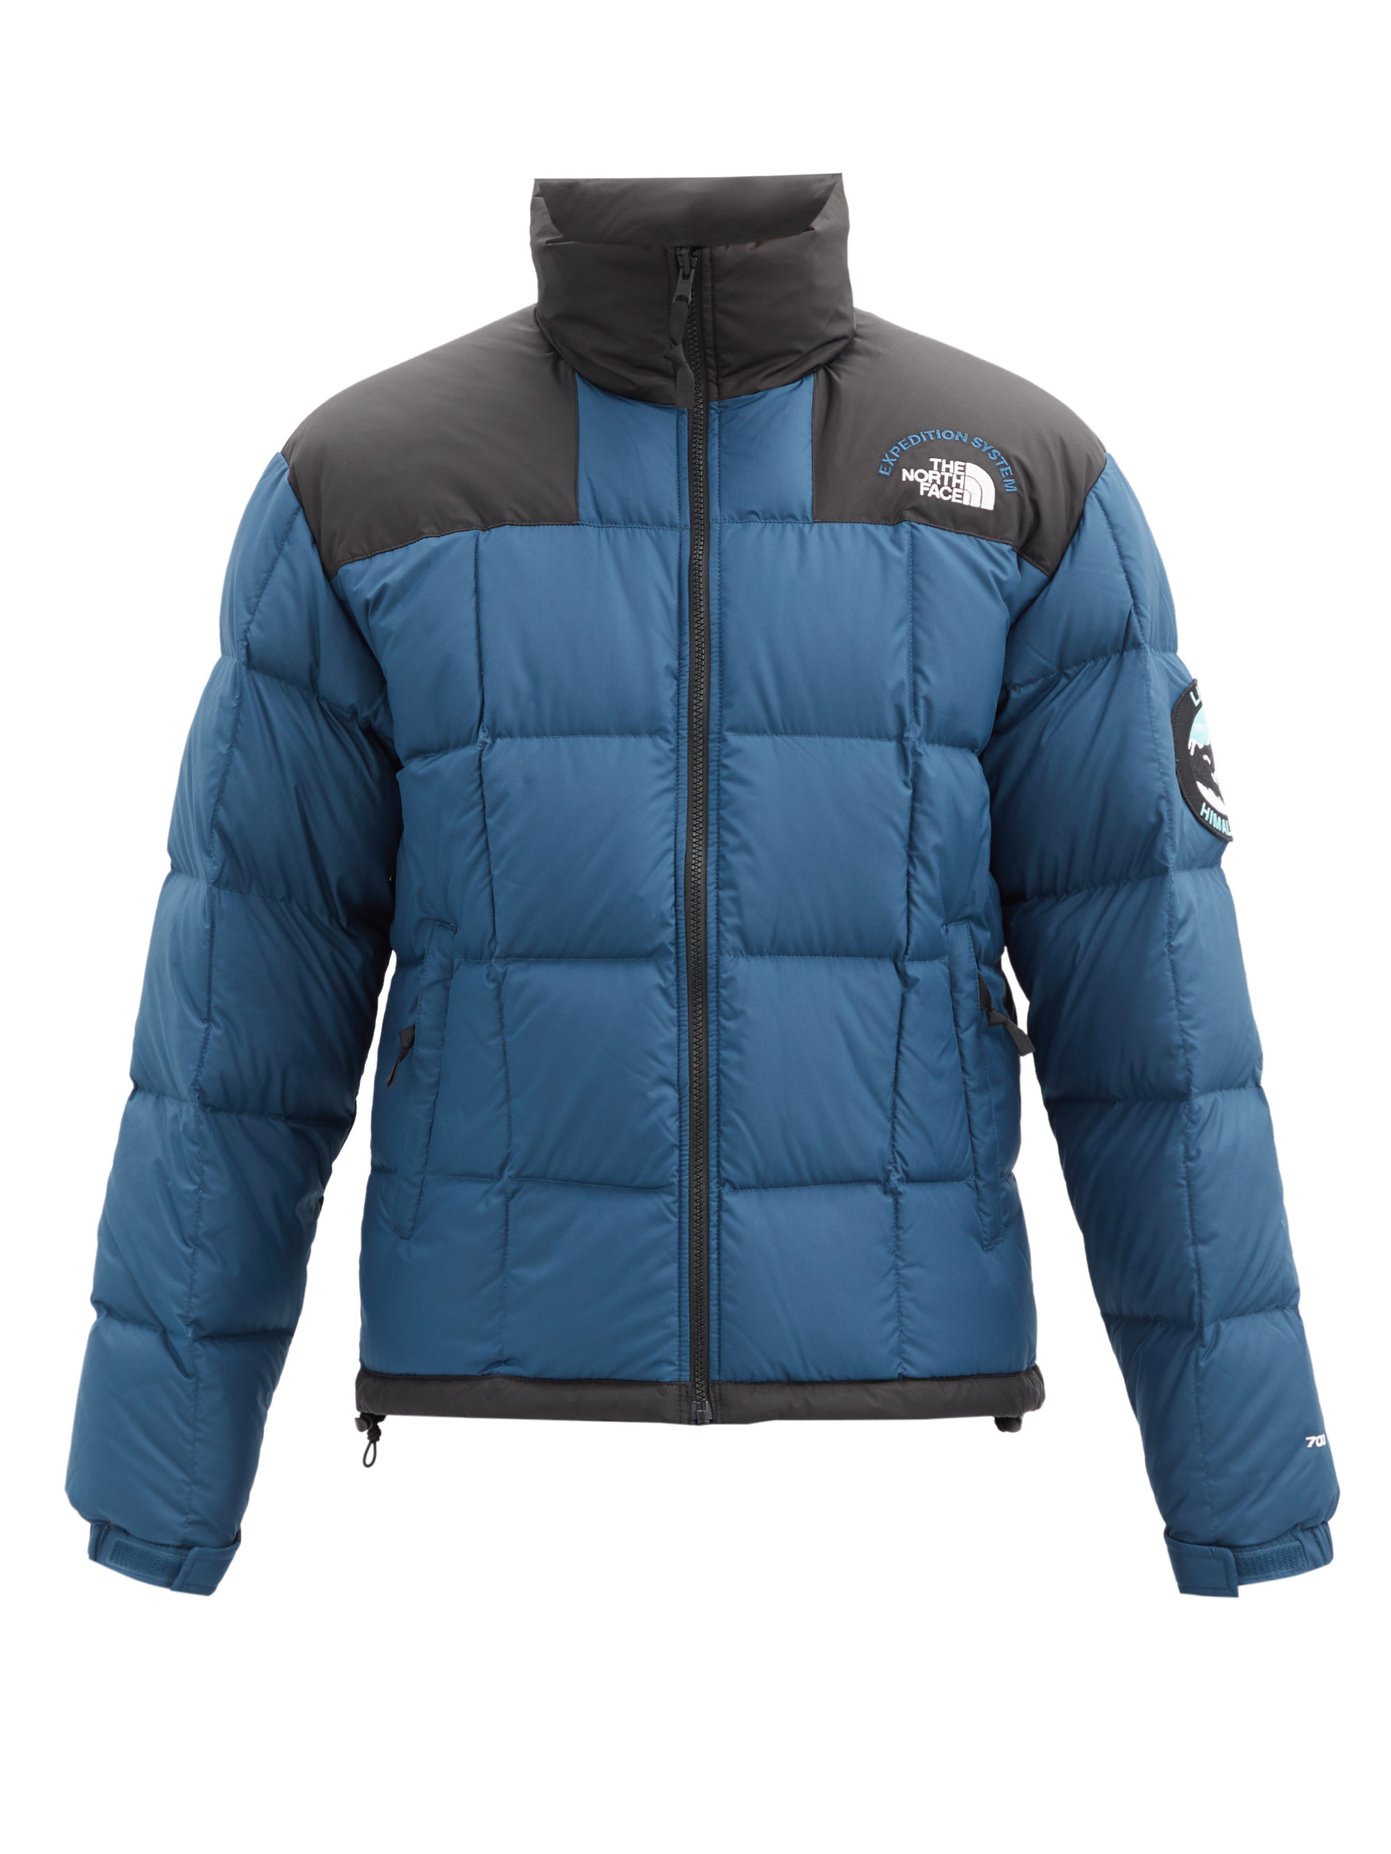 NSE LHotse Expedition down coat | The 